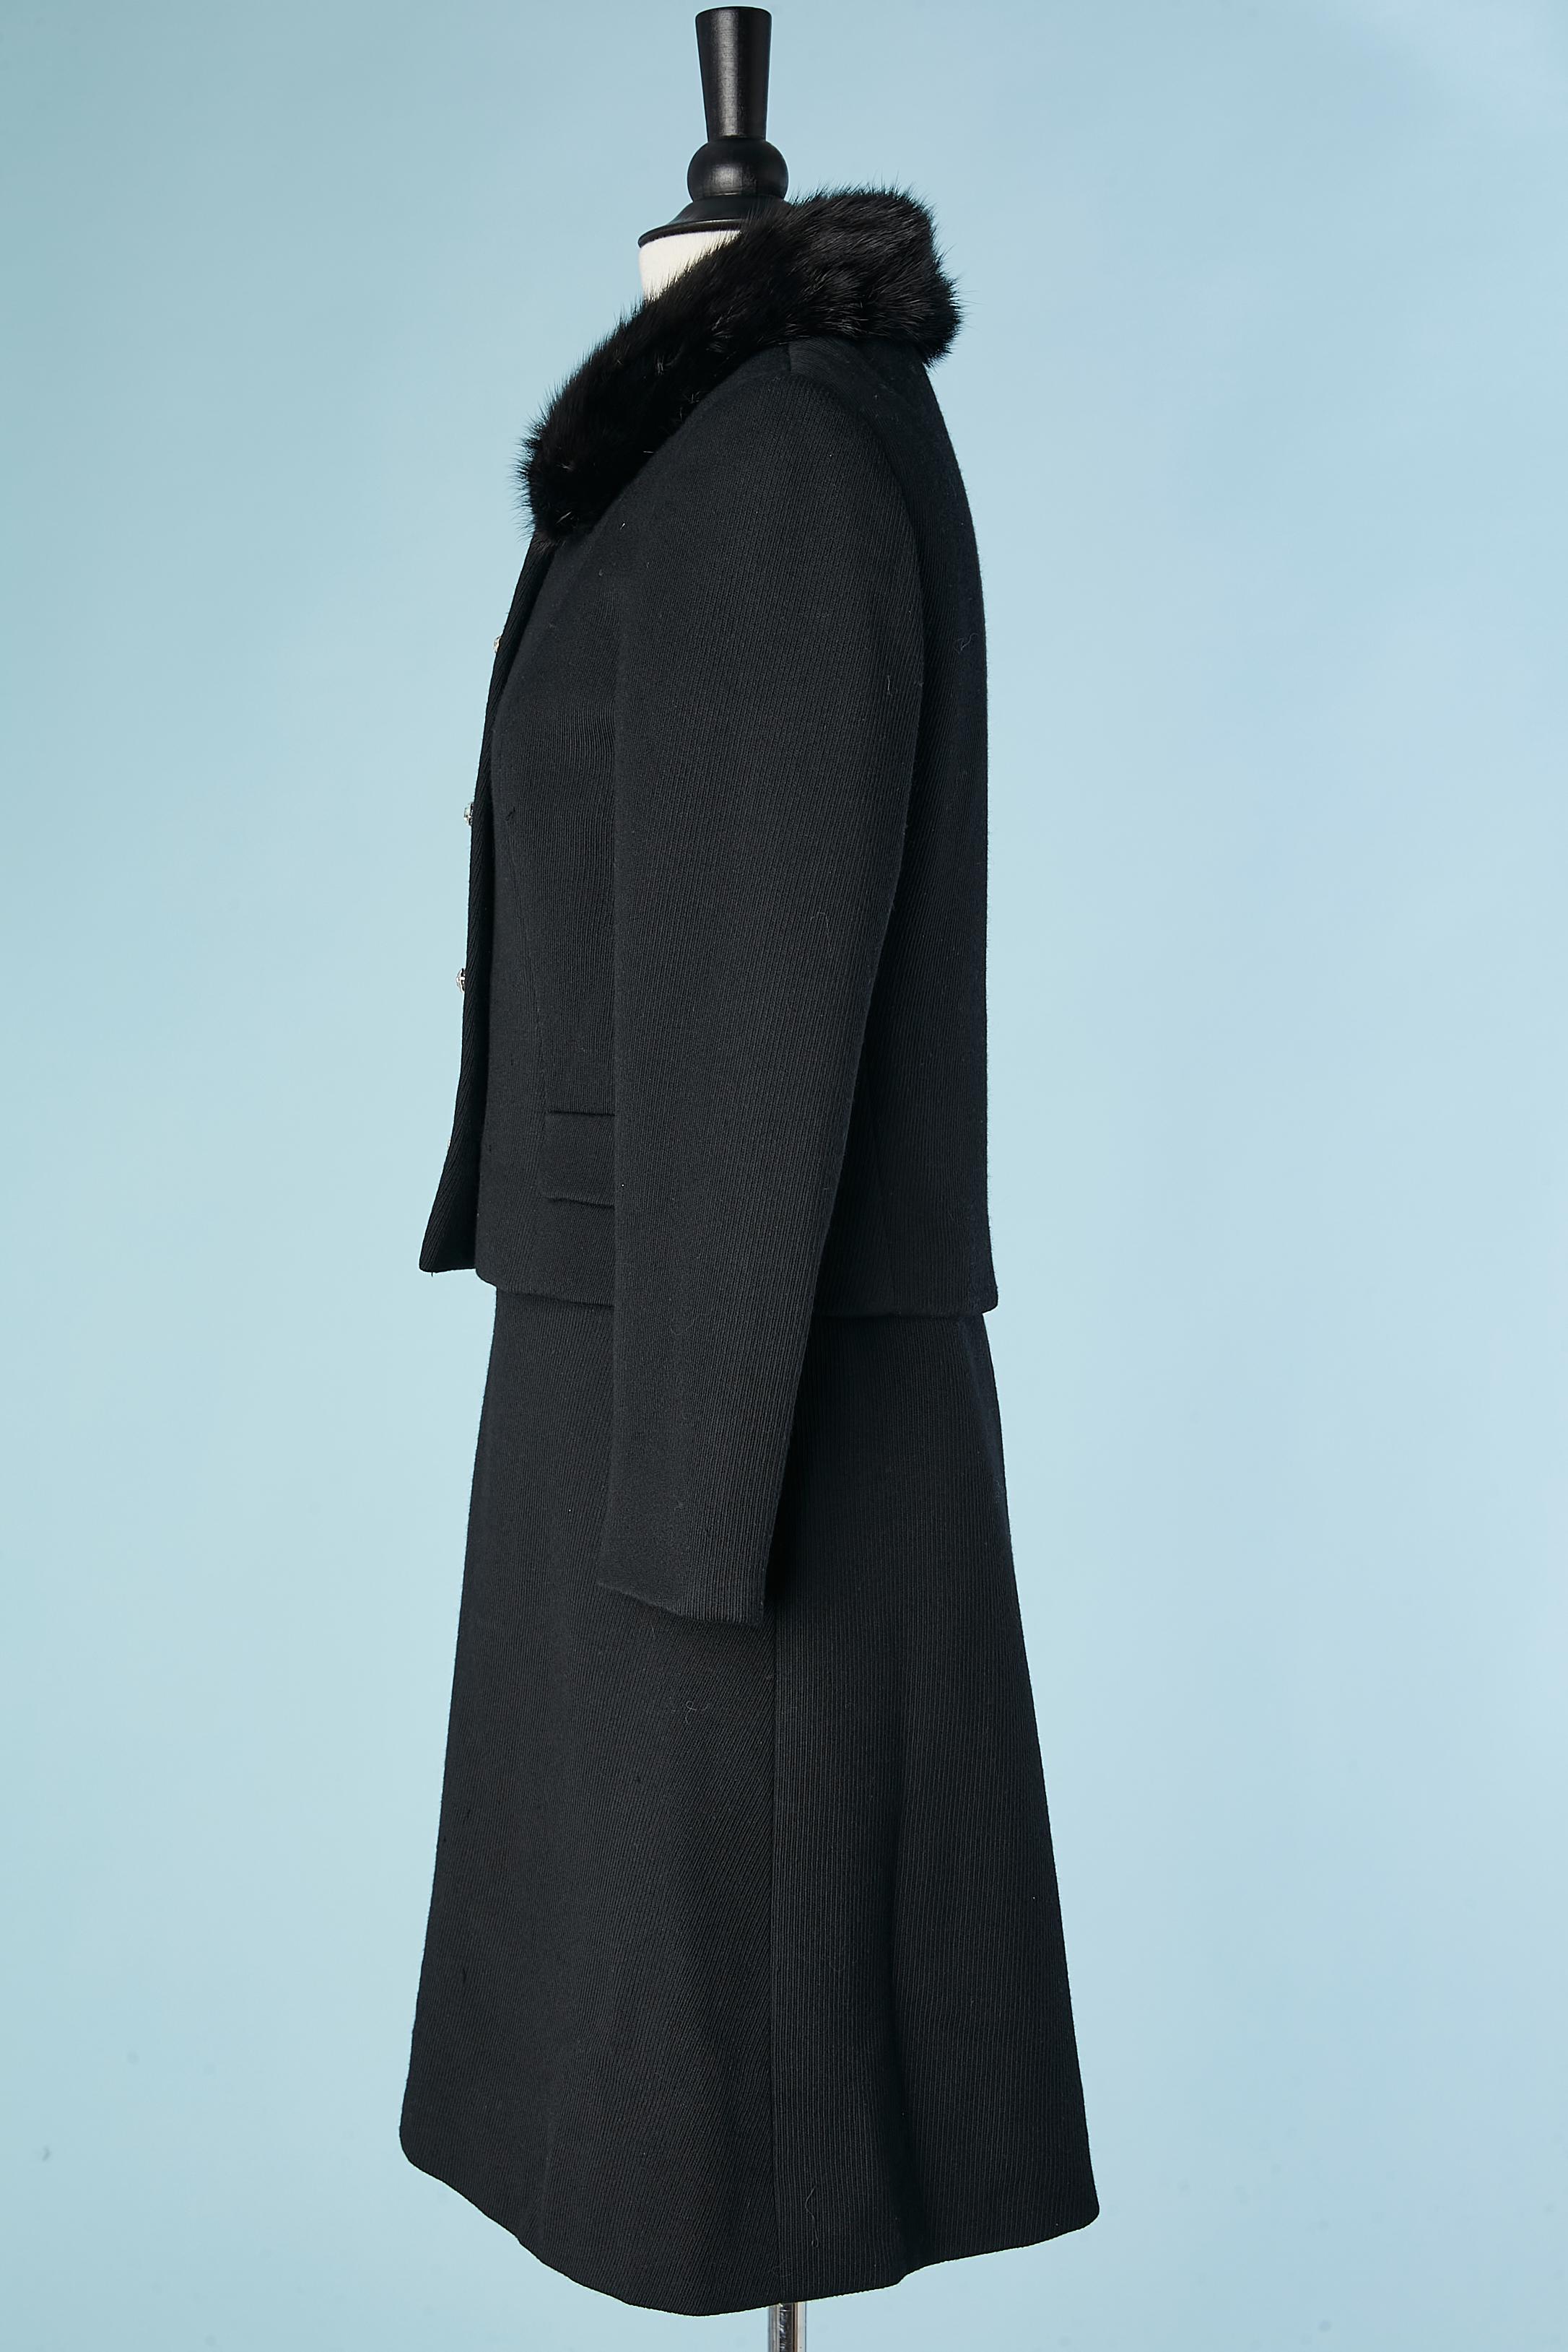 Black wool jacket and dress cocktail ensemble Anna Belletti Roma Circa 1960's For Sale 1